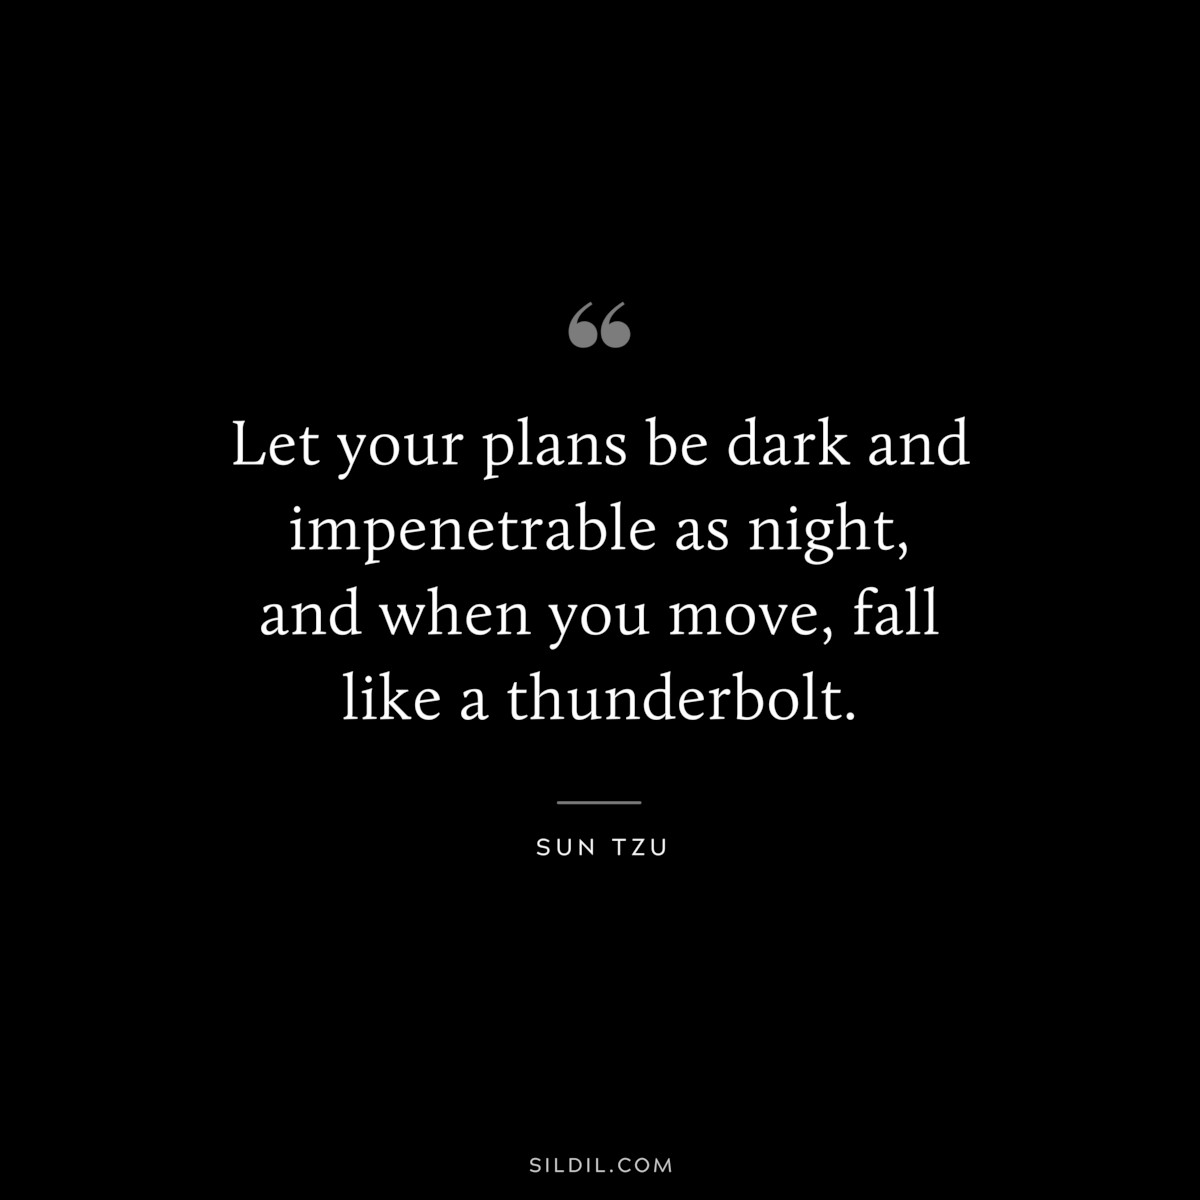 Let your plans be dark and impenetrable as night, and when you move, fall like a thunderbolt.― Sun Tzu